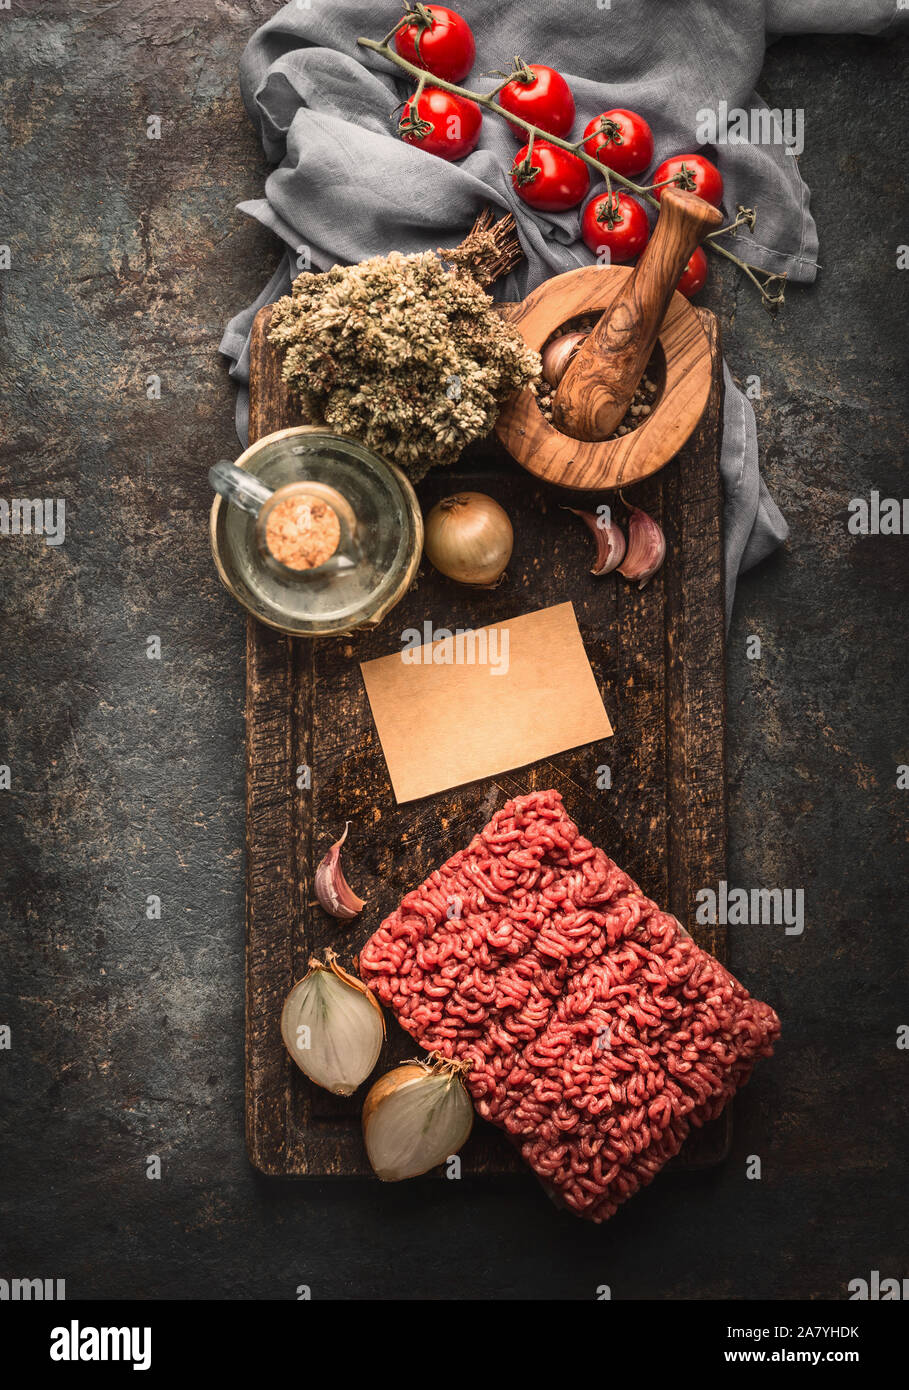 Minced meat und cooking ingredients for Bolognese sauce on dark rustic kitchen table, top view Stock Photo